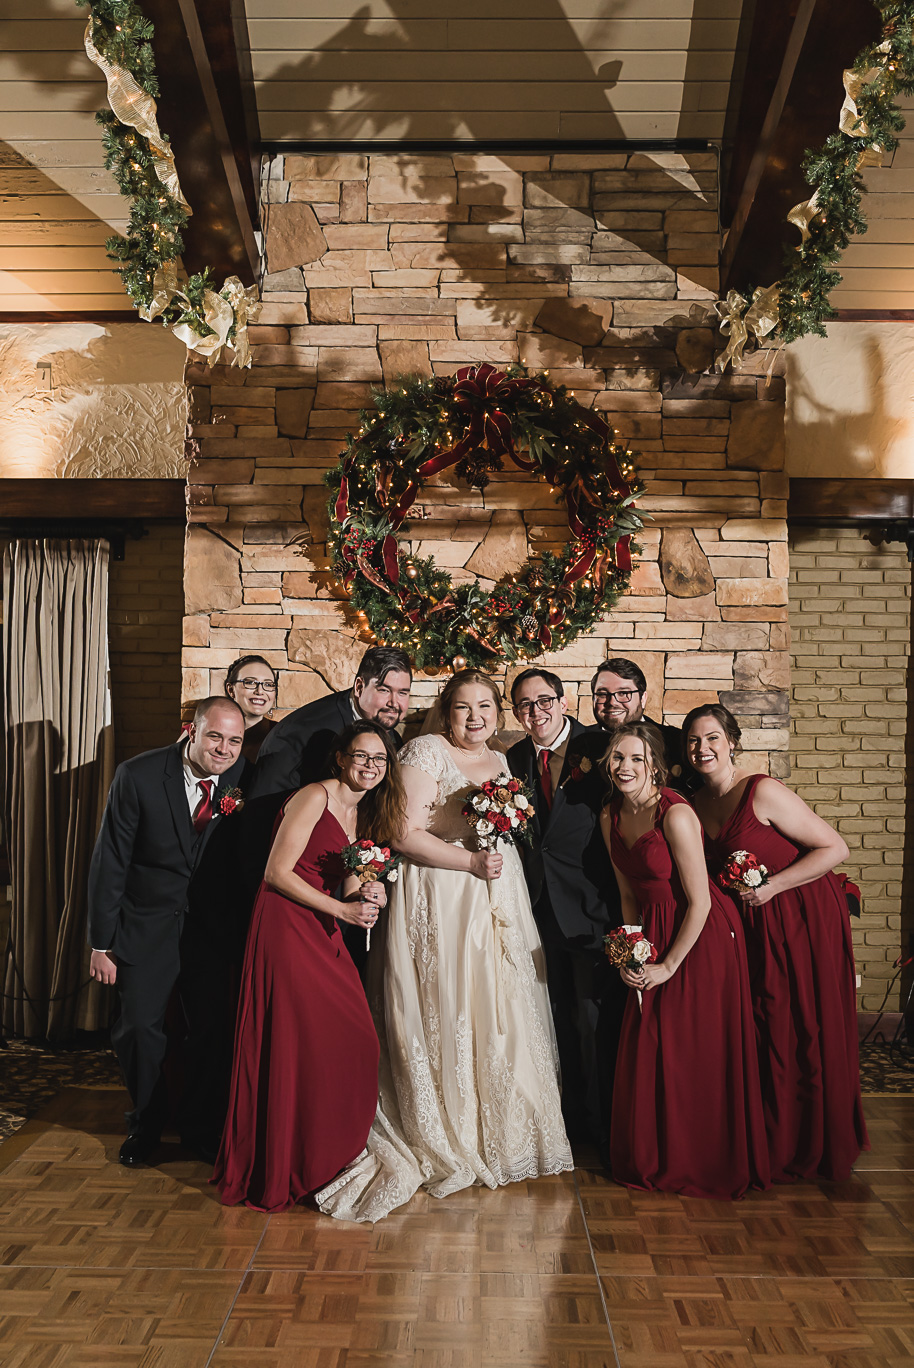 Winter Christmas Iroquois Club Wedding in Bloomfield Township, Michigan provided by top-rated Detroit wedding photographer Kari Dawson and her team.